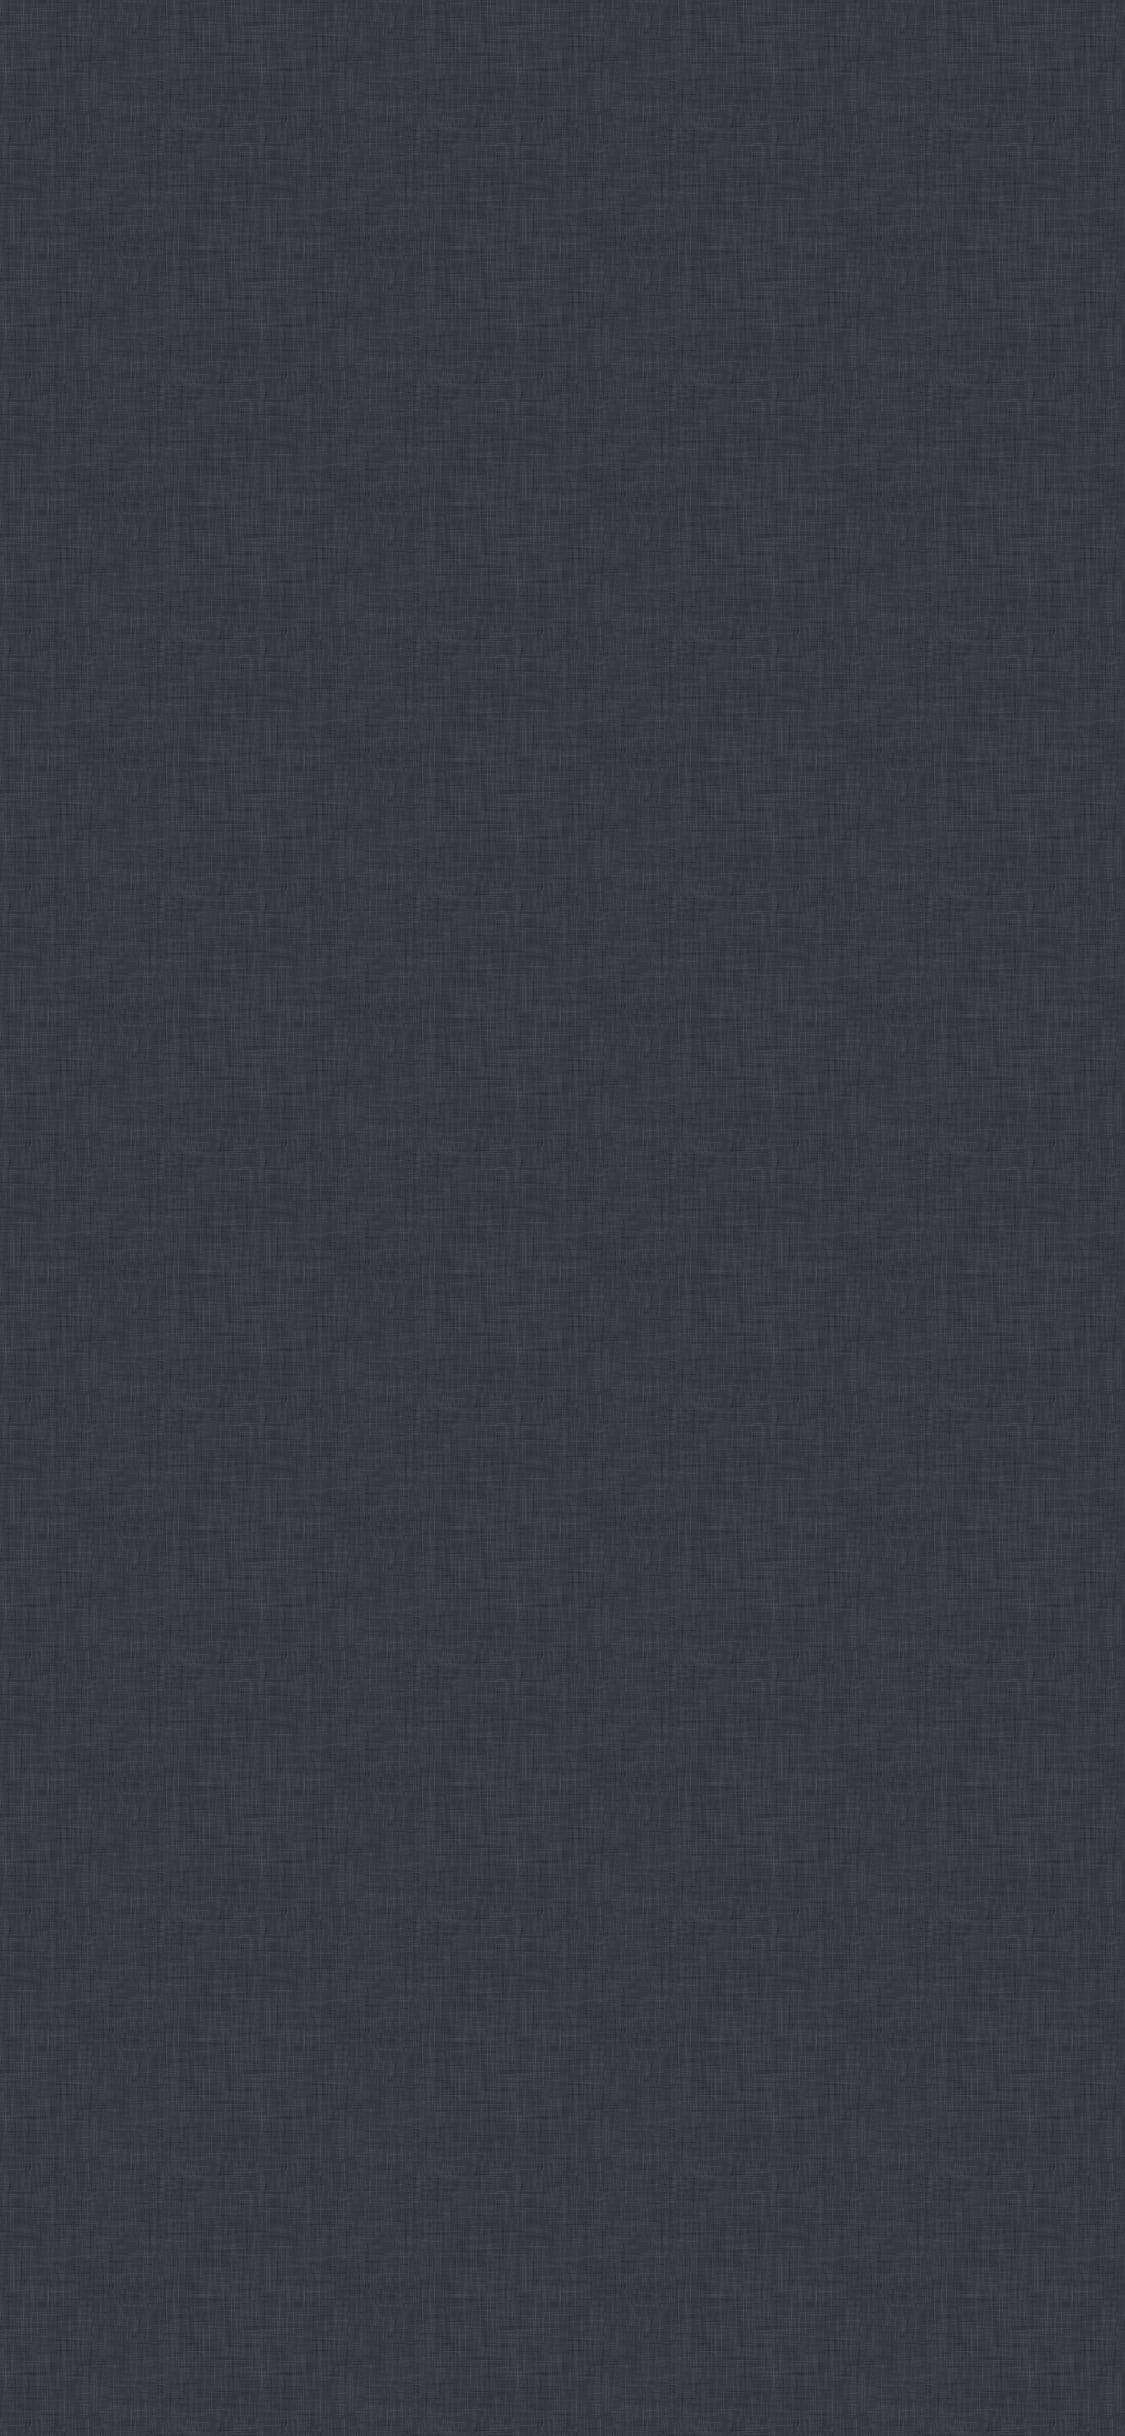 Solid Grey iPhone Wallpaper, HD Solid Grey iPhone Background on WallpaperBat